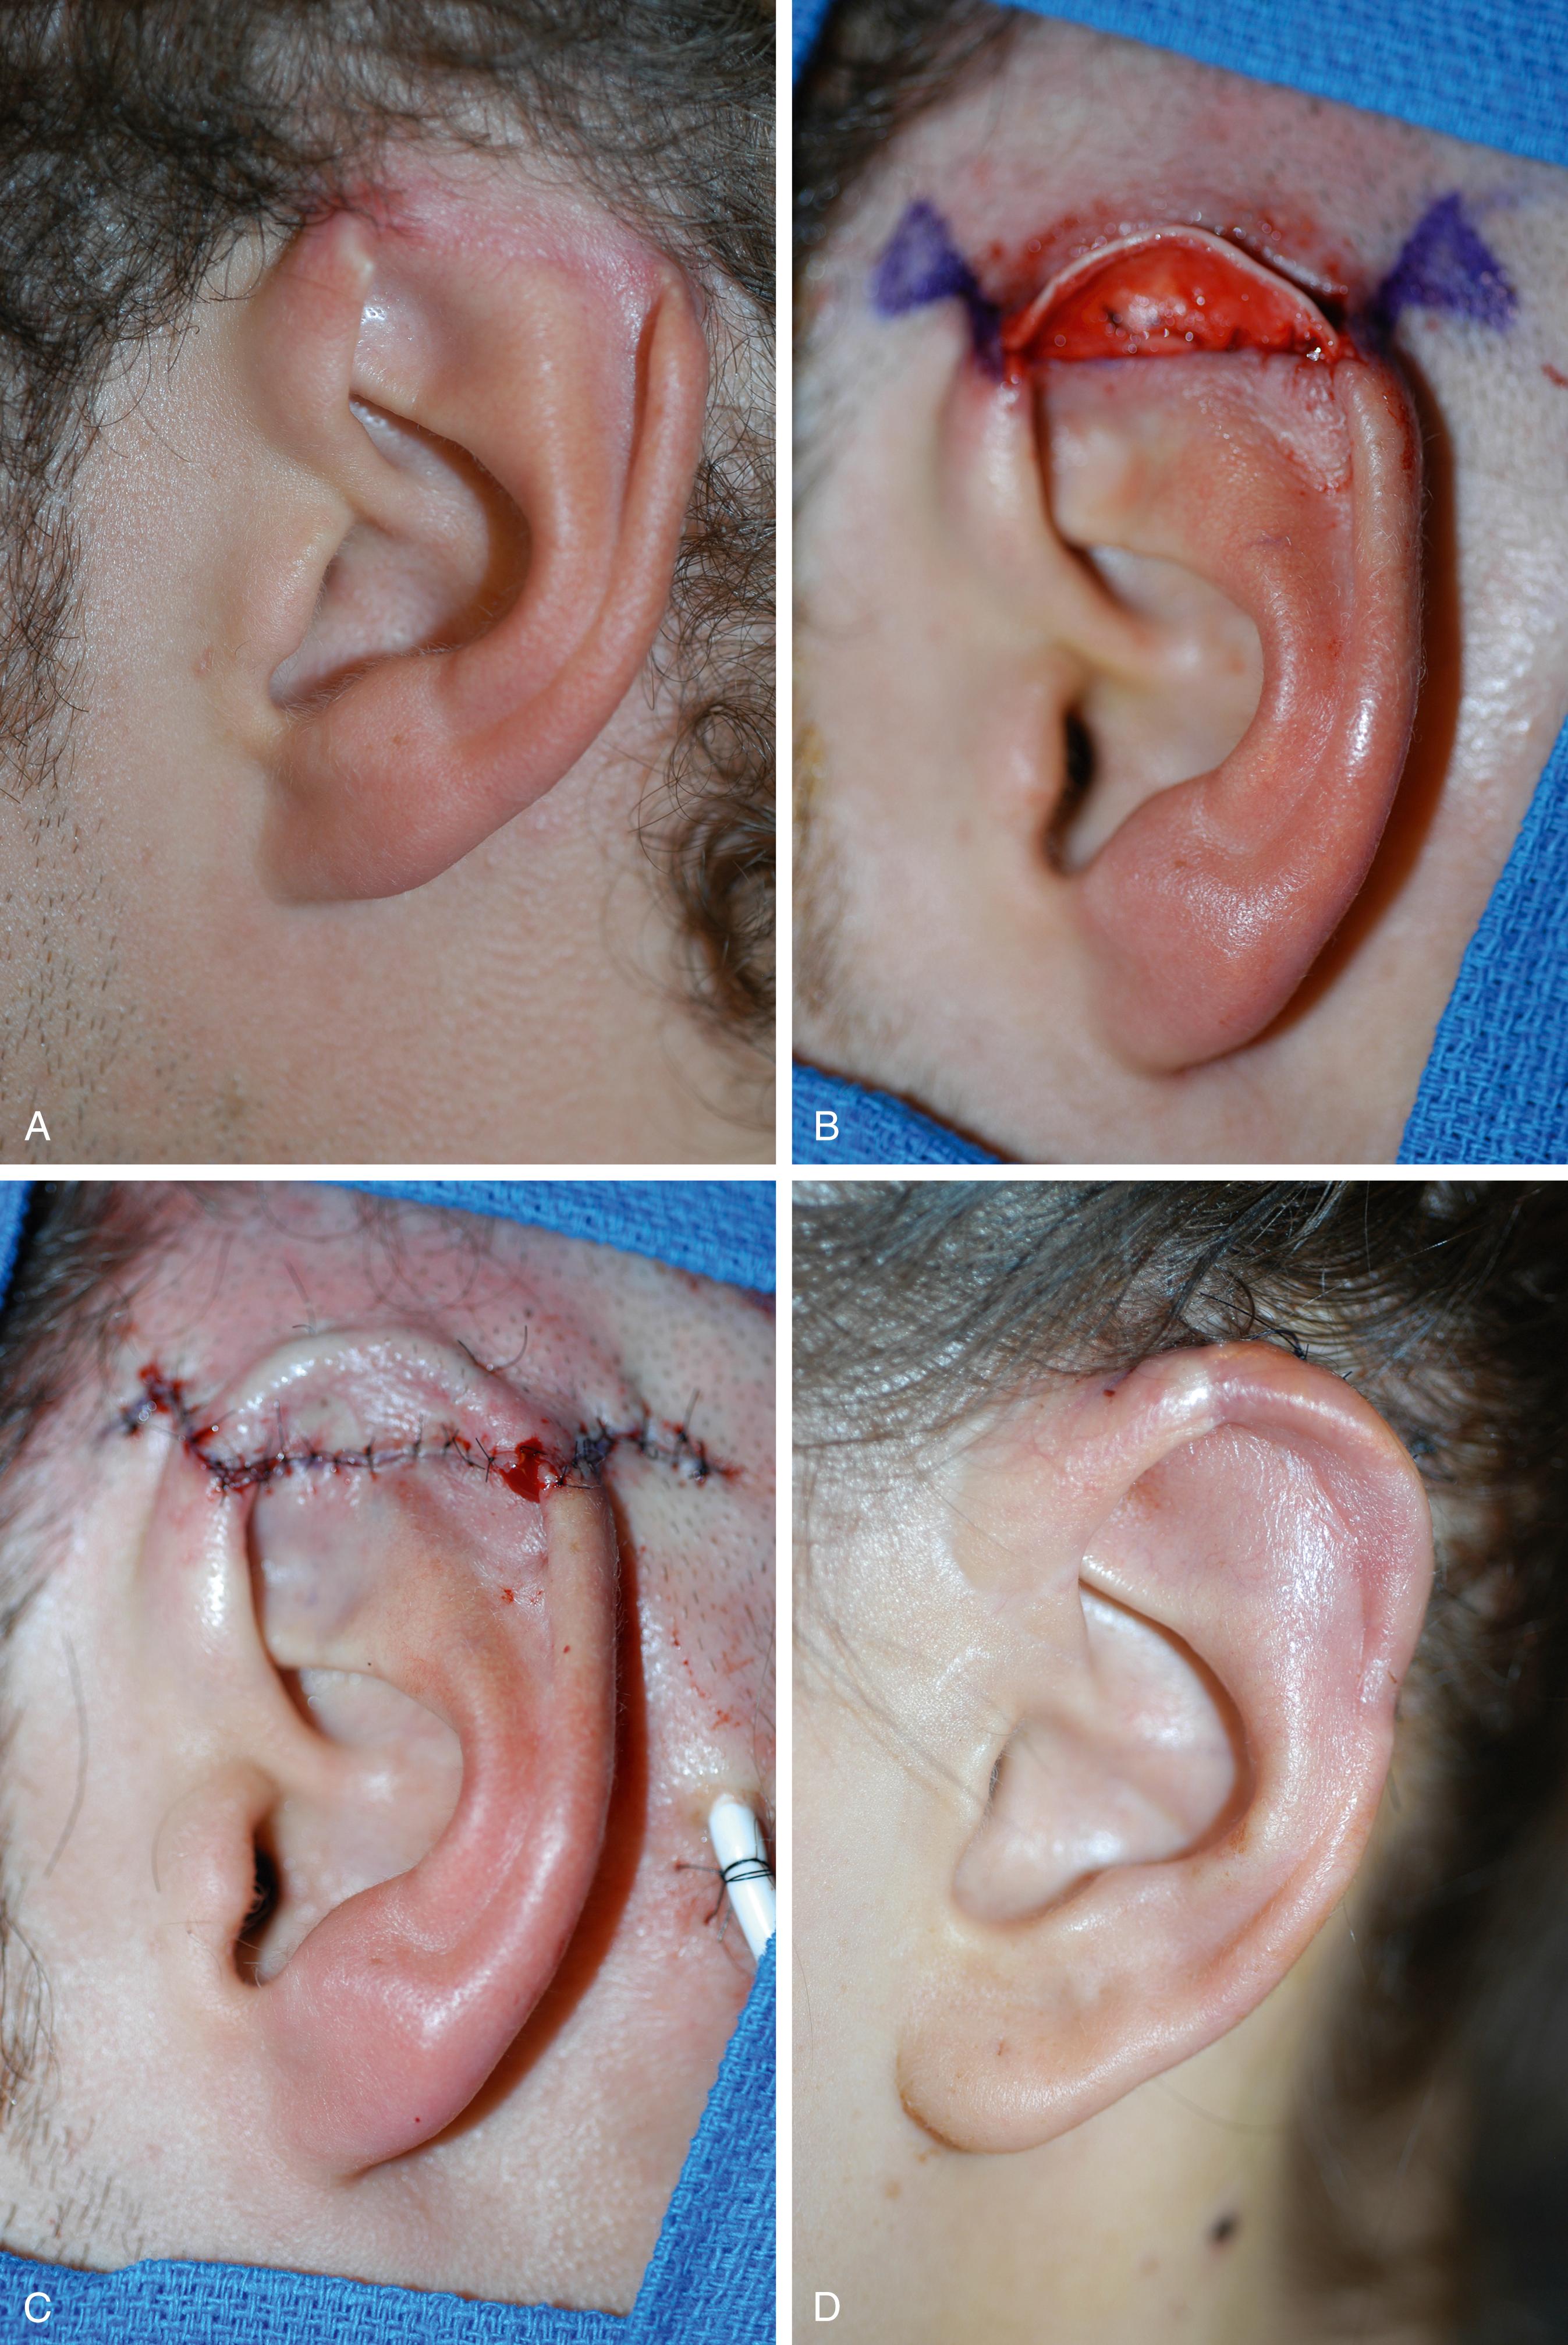 Fig. 32.3, Case 2. (A) The defect is a quarter and no more than two adjacent planes. (B) The conchal graft harvested on the contralateral ear is sutured to the fibrocartilage and the retroauricular skin will cover it. (C) Appearance after the first stage. (D) Result after elevation of the reconstructed contours using a full-thickness skin graft harvested from the contralateral retroauricular sulcus.